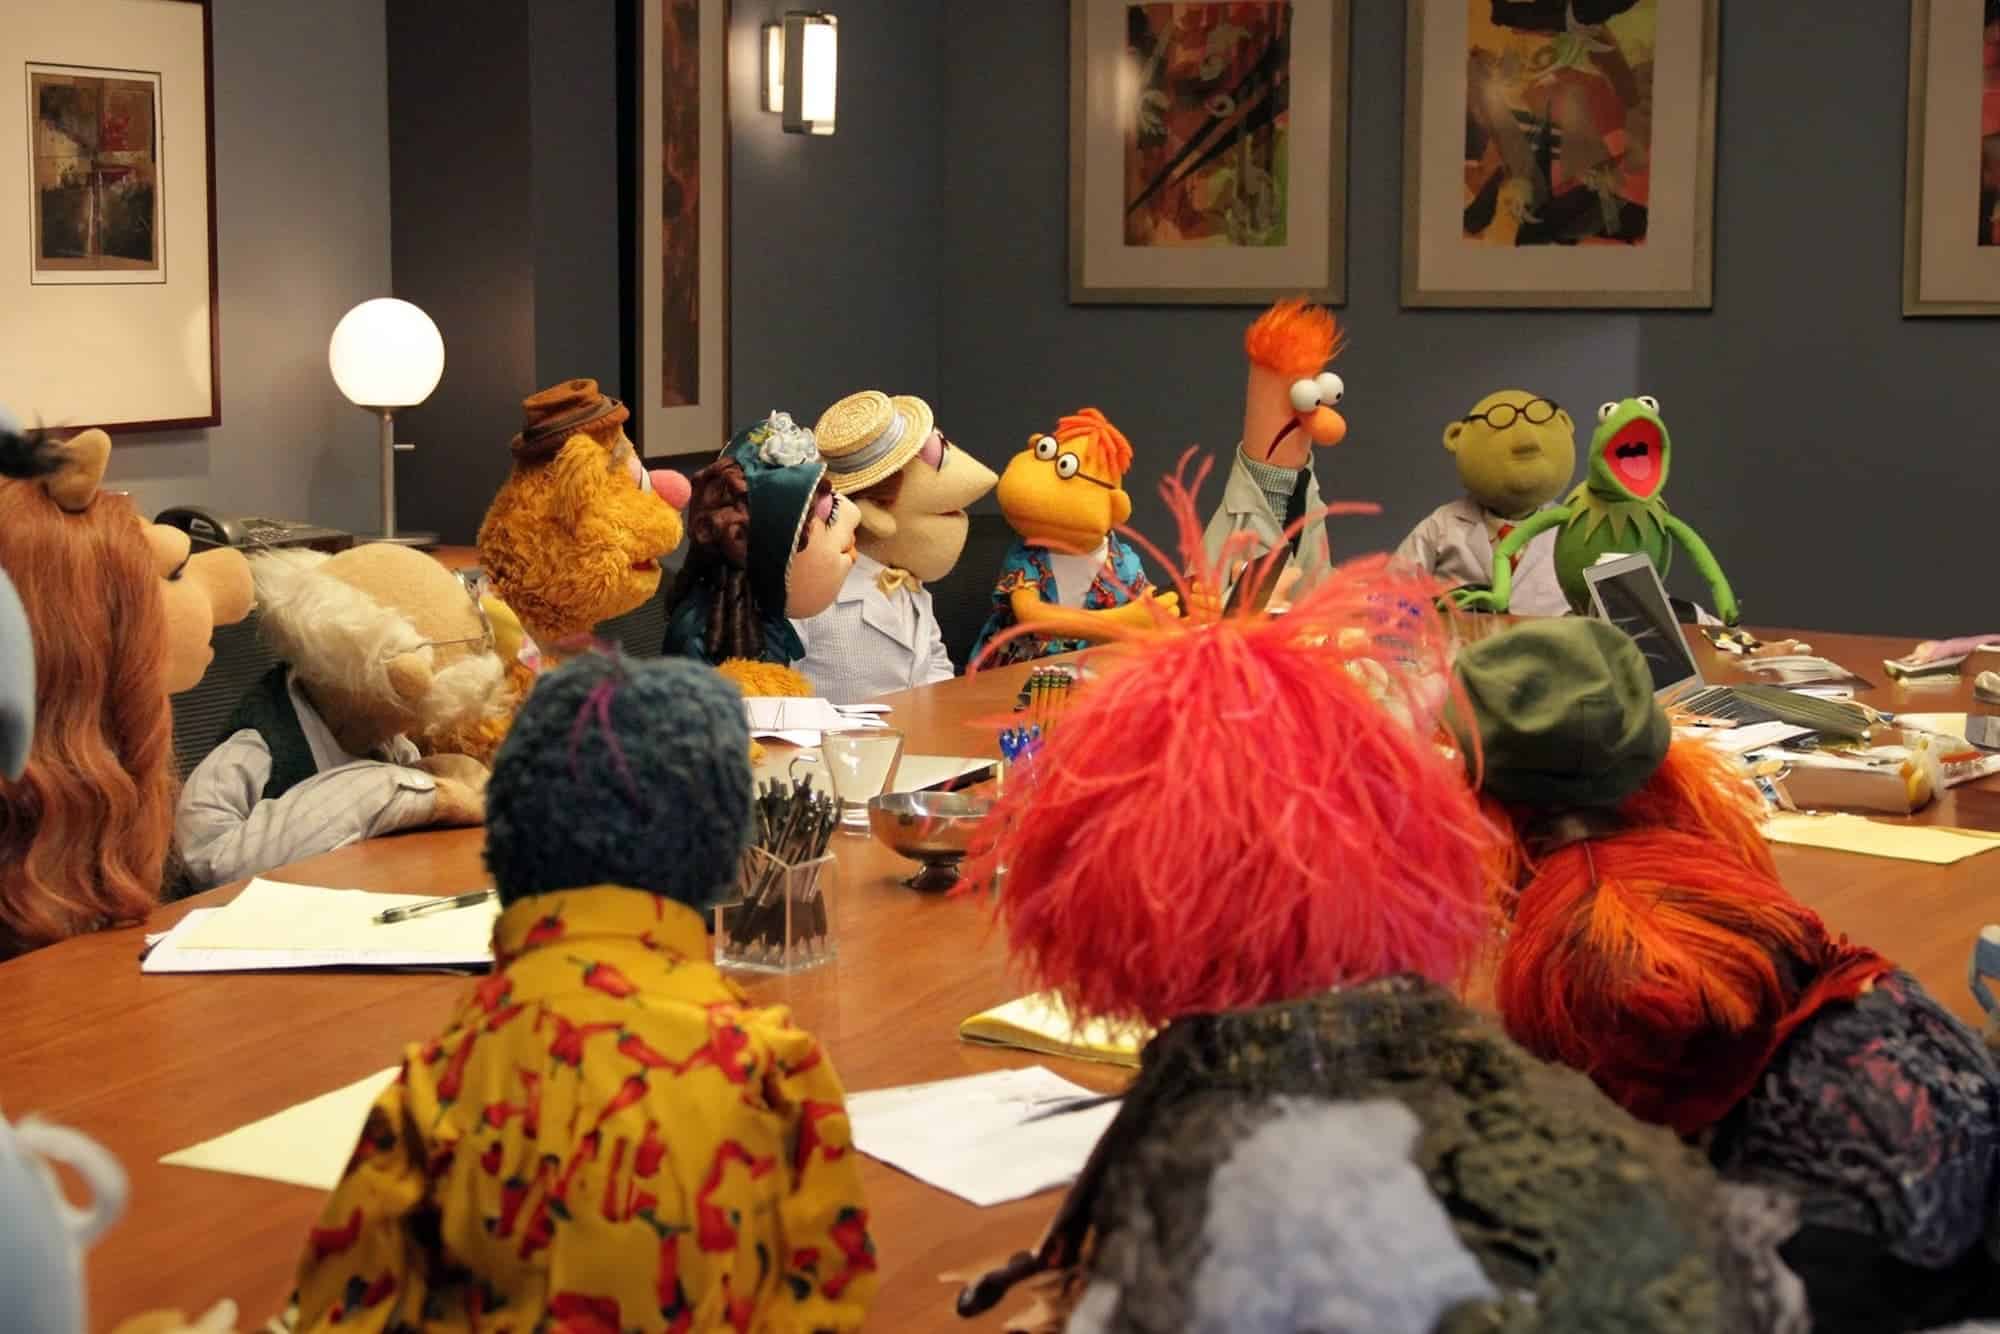 ultimate guide to ineffective meetings - kermit the frog meeting with muppets